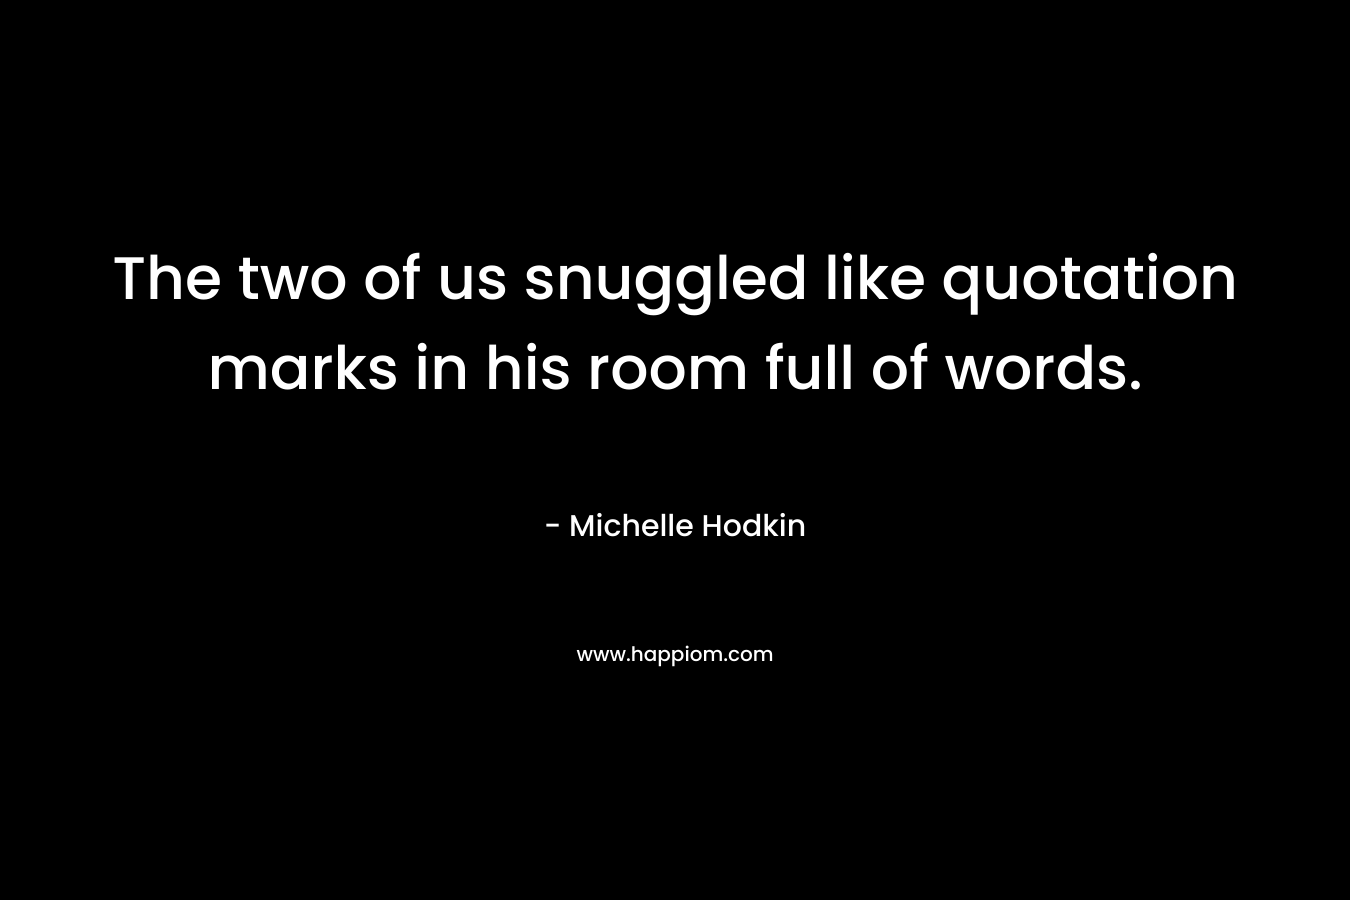 The two of us snuggled like quotation marks in his room full of words.